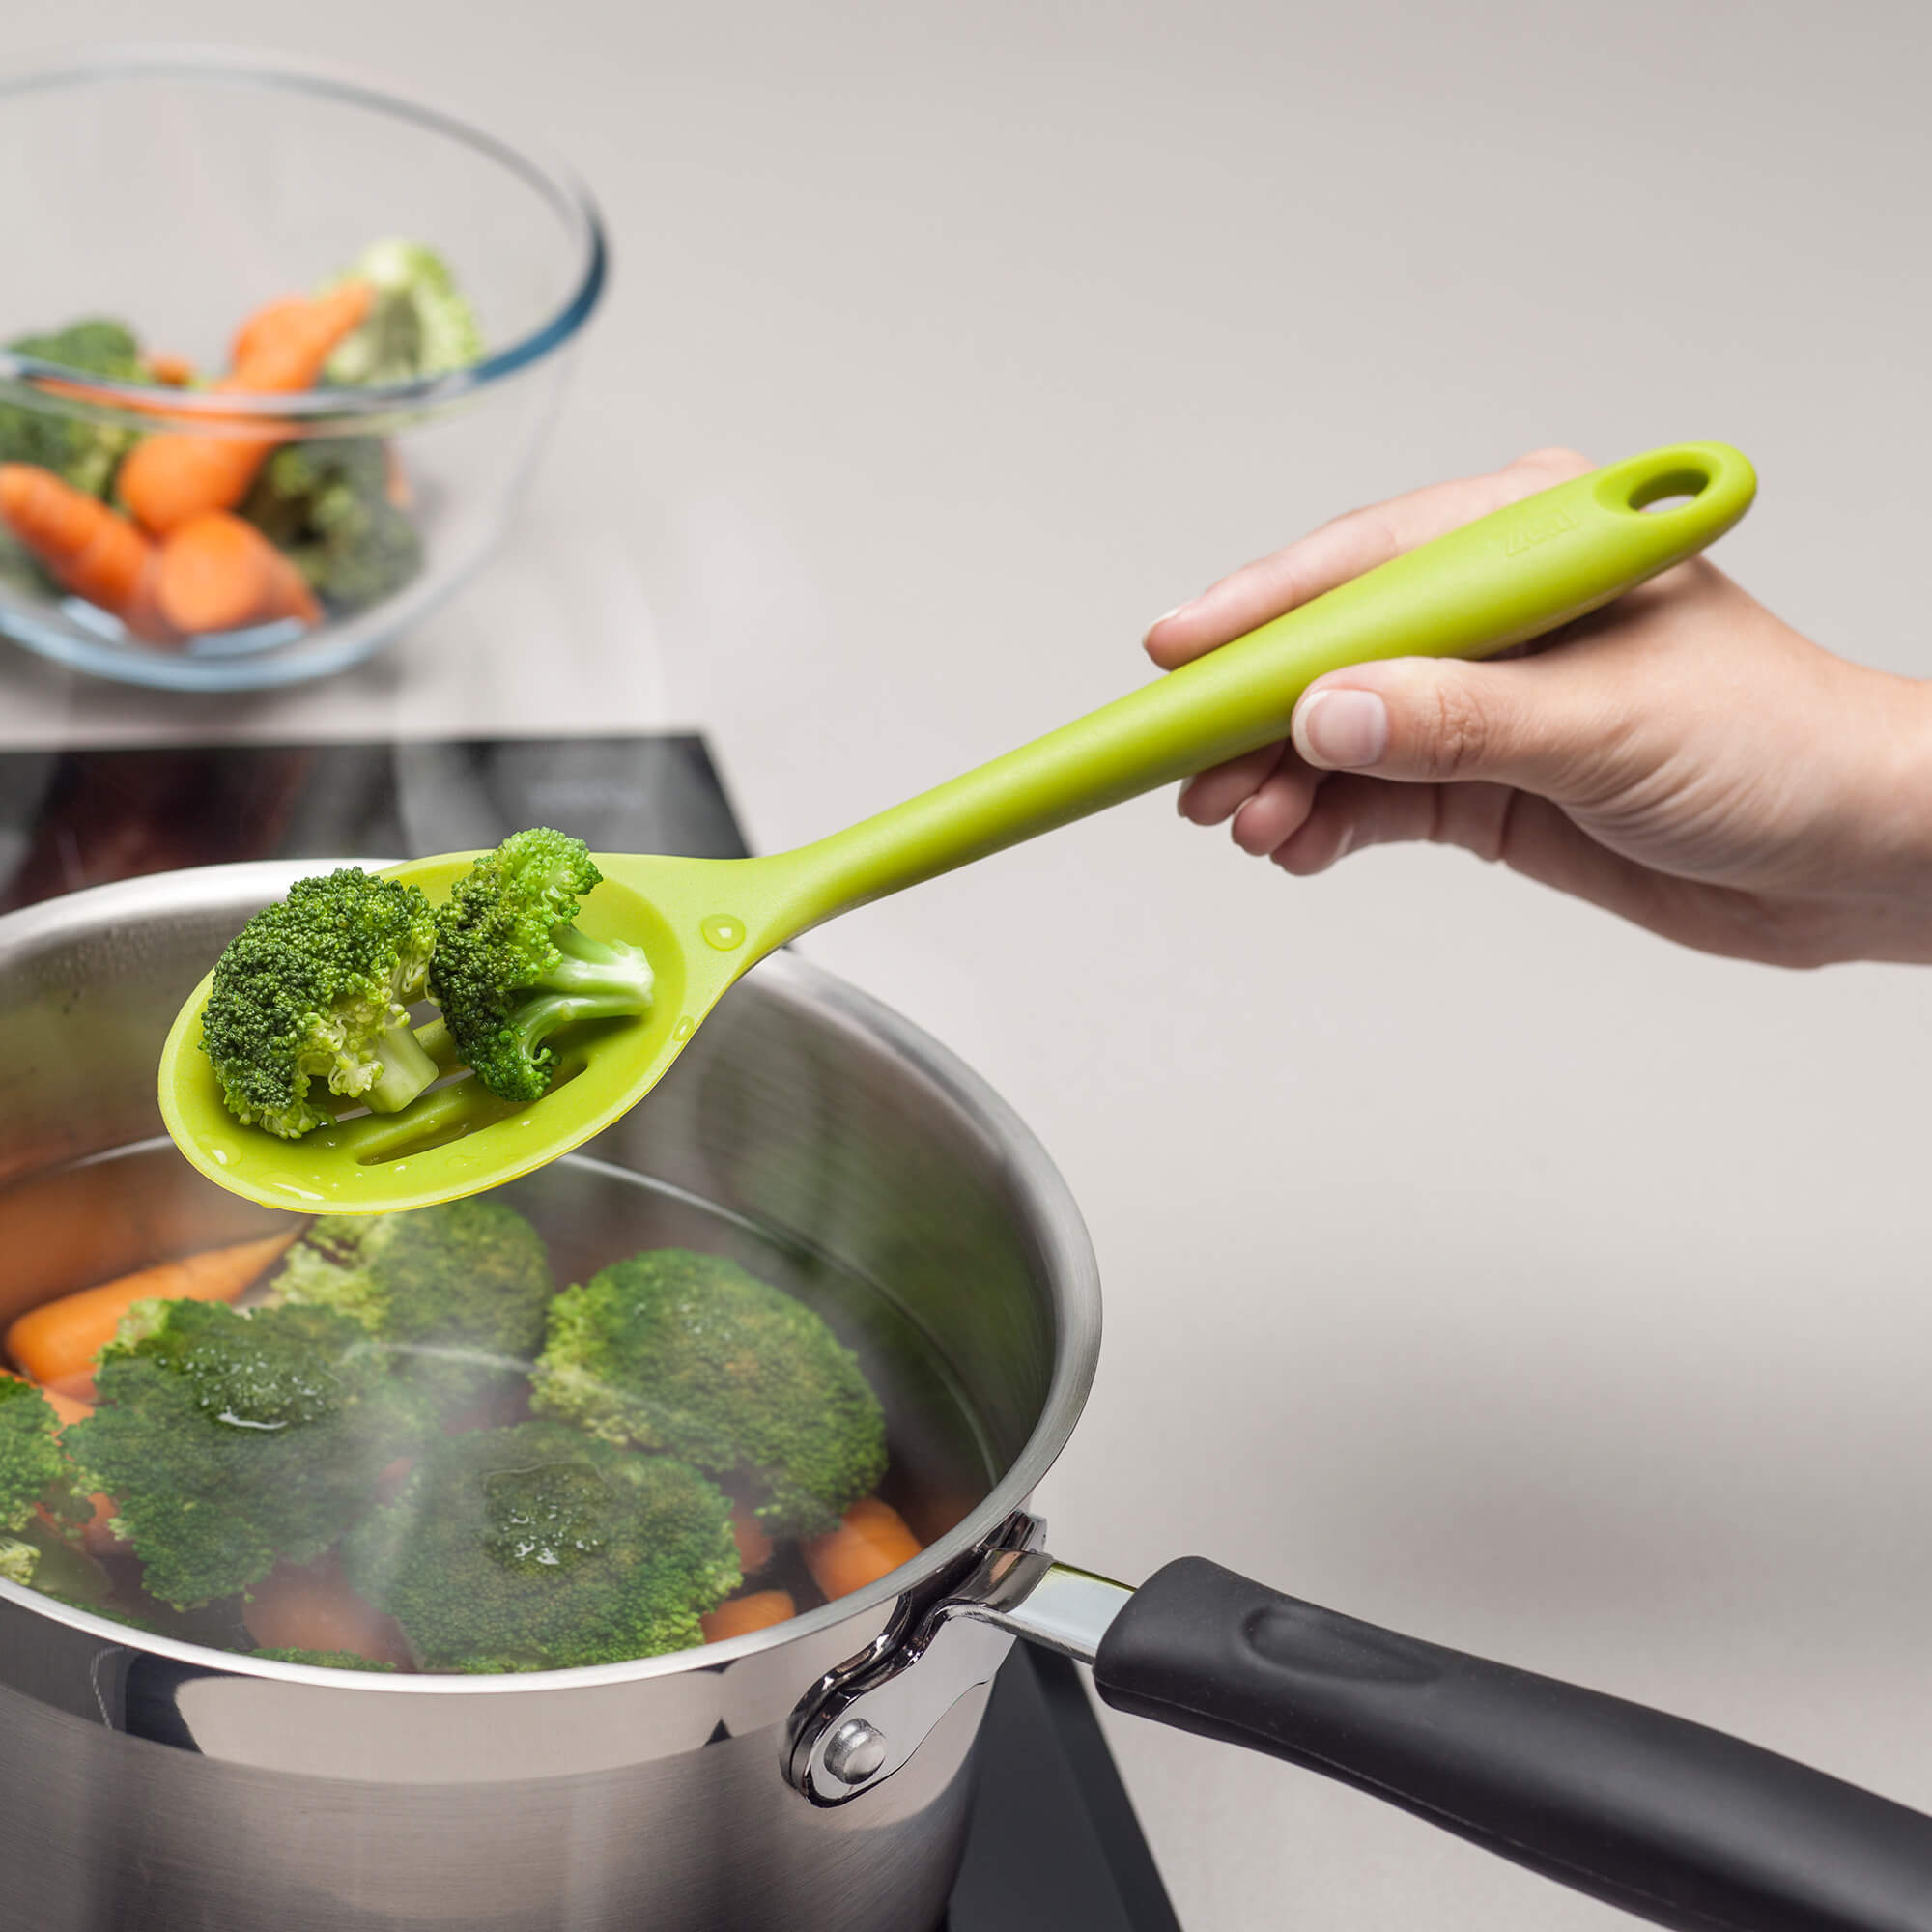 Using a Zeal Silicone Slotted Spoon to drain broccoli